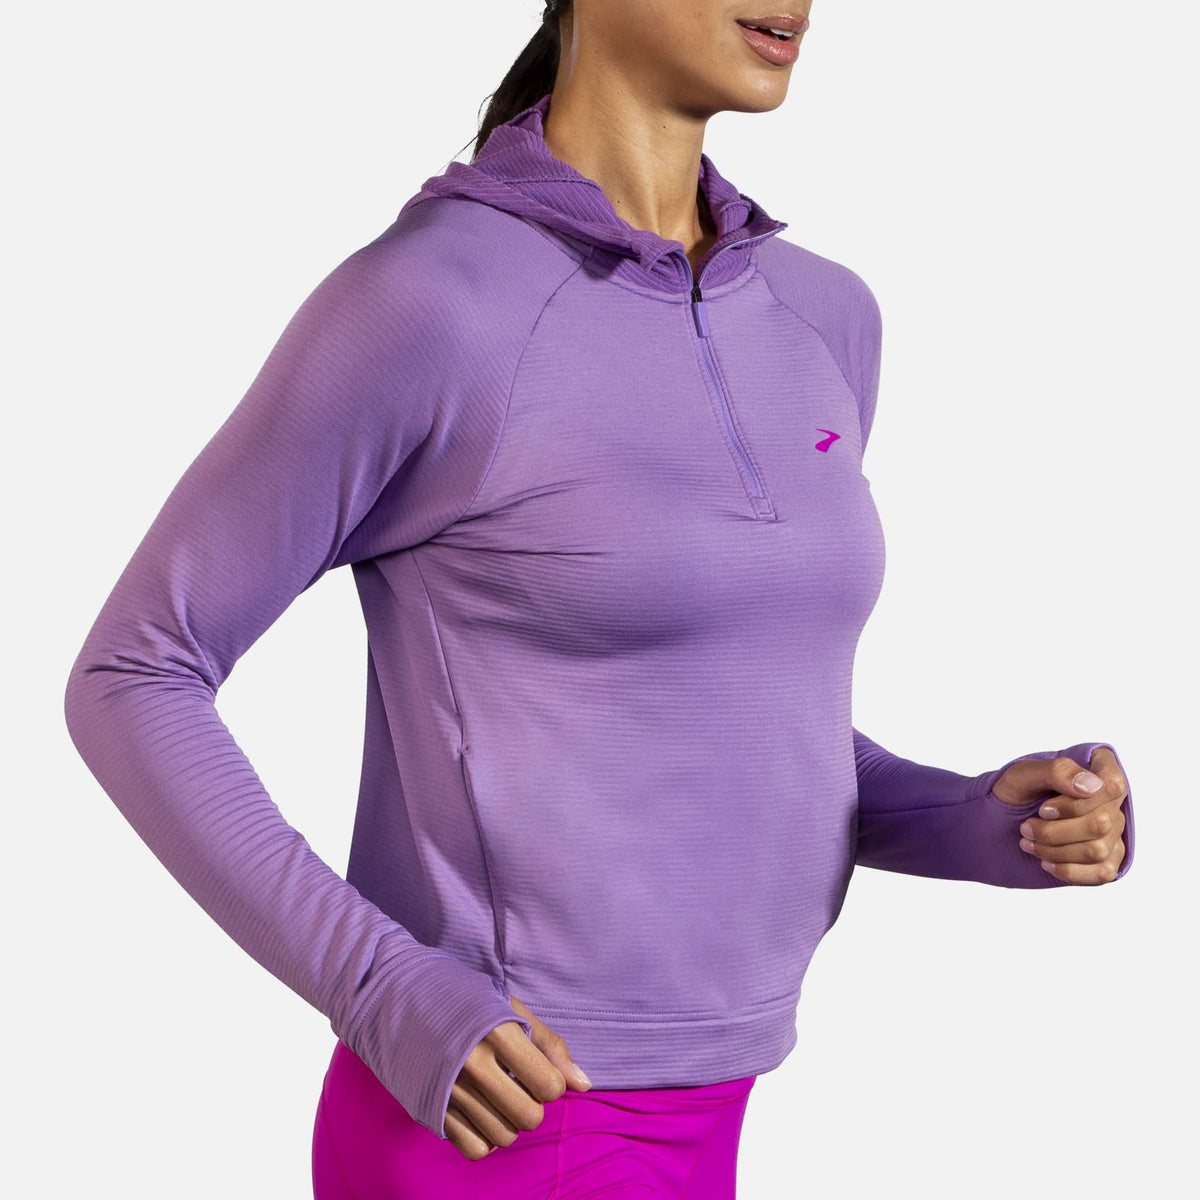 Brooks Notch Thermal Hoodie chandail de course à pied heliotrope femme lateral